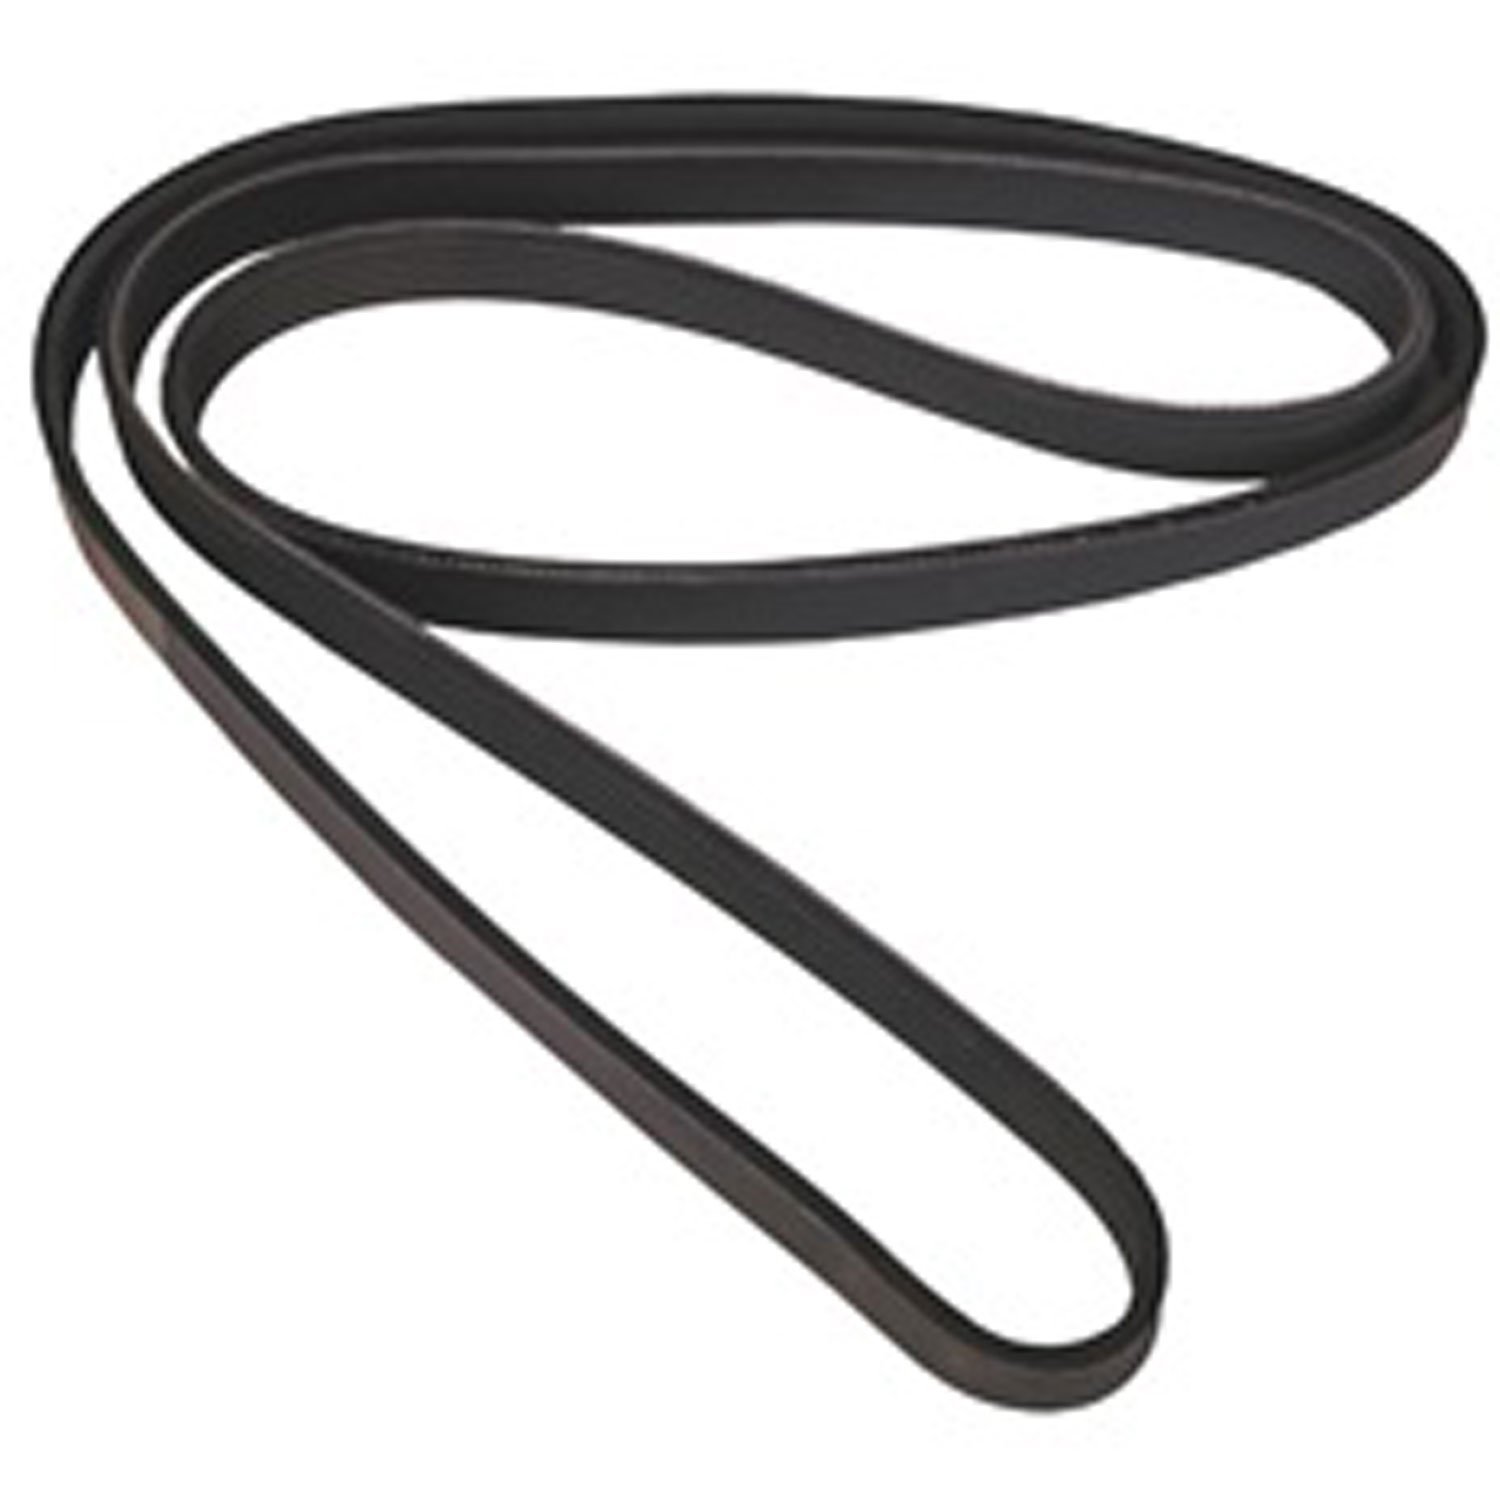 Stock replacement serpentine belt from Omix-ADA, Fits 91-94 Jeep Wrangler YJ 91-95 Jeep Cherokee